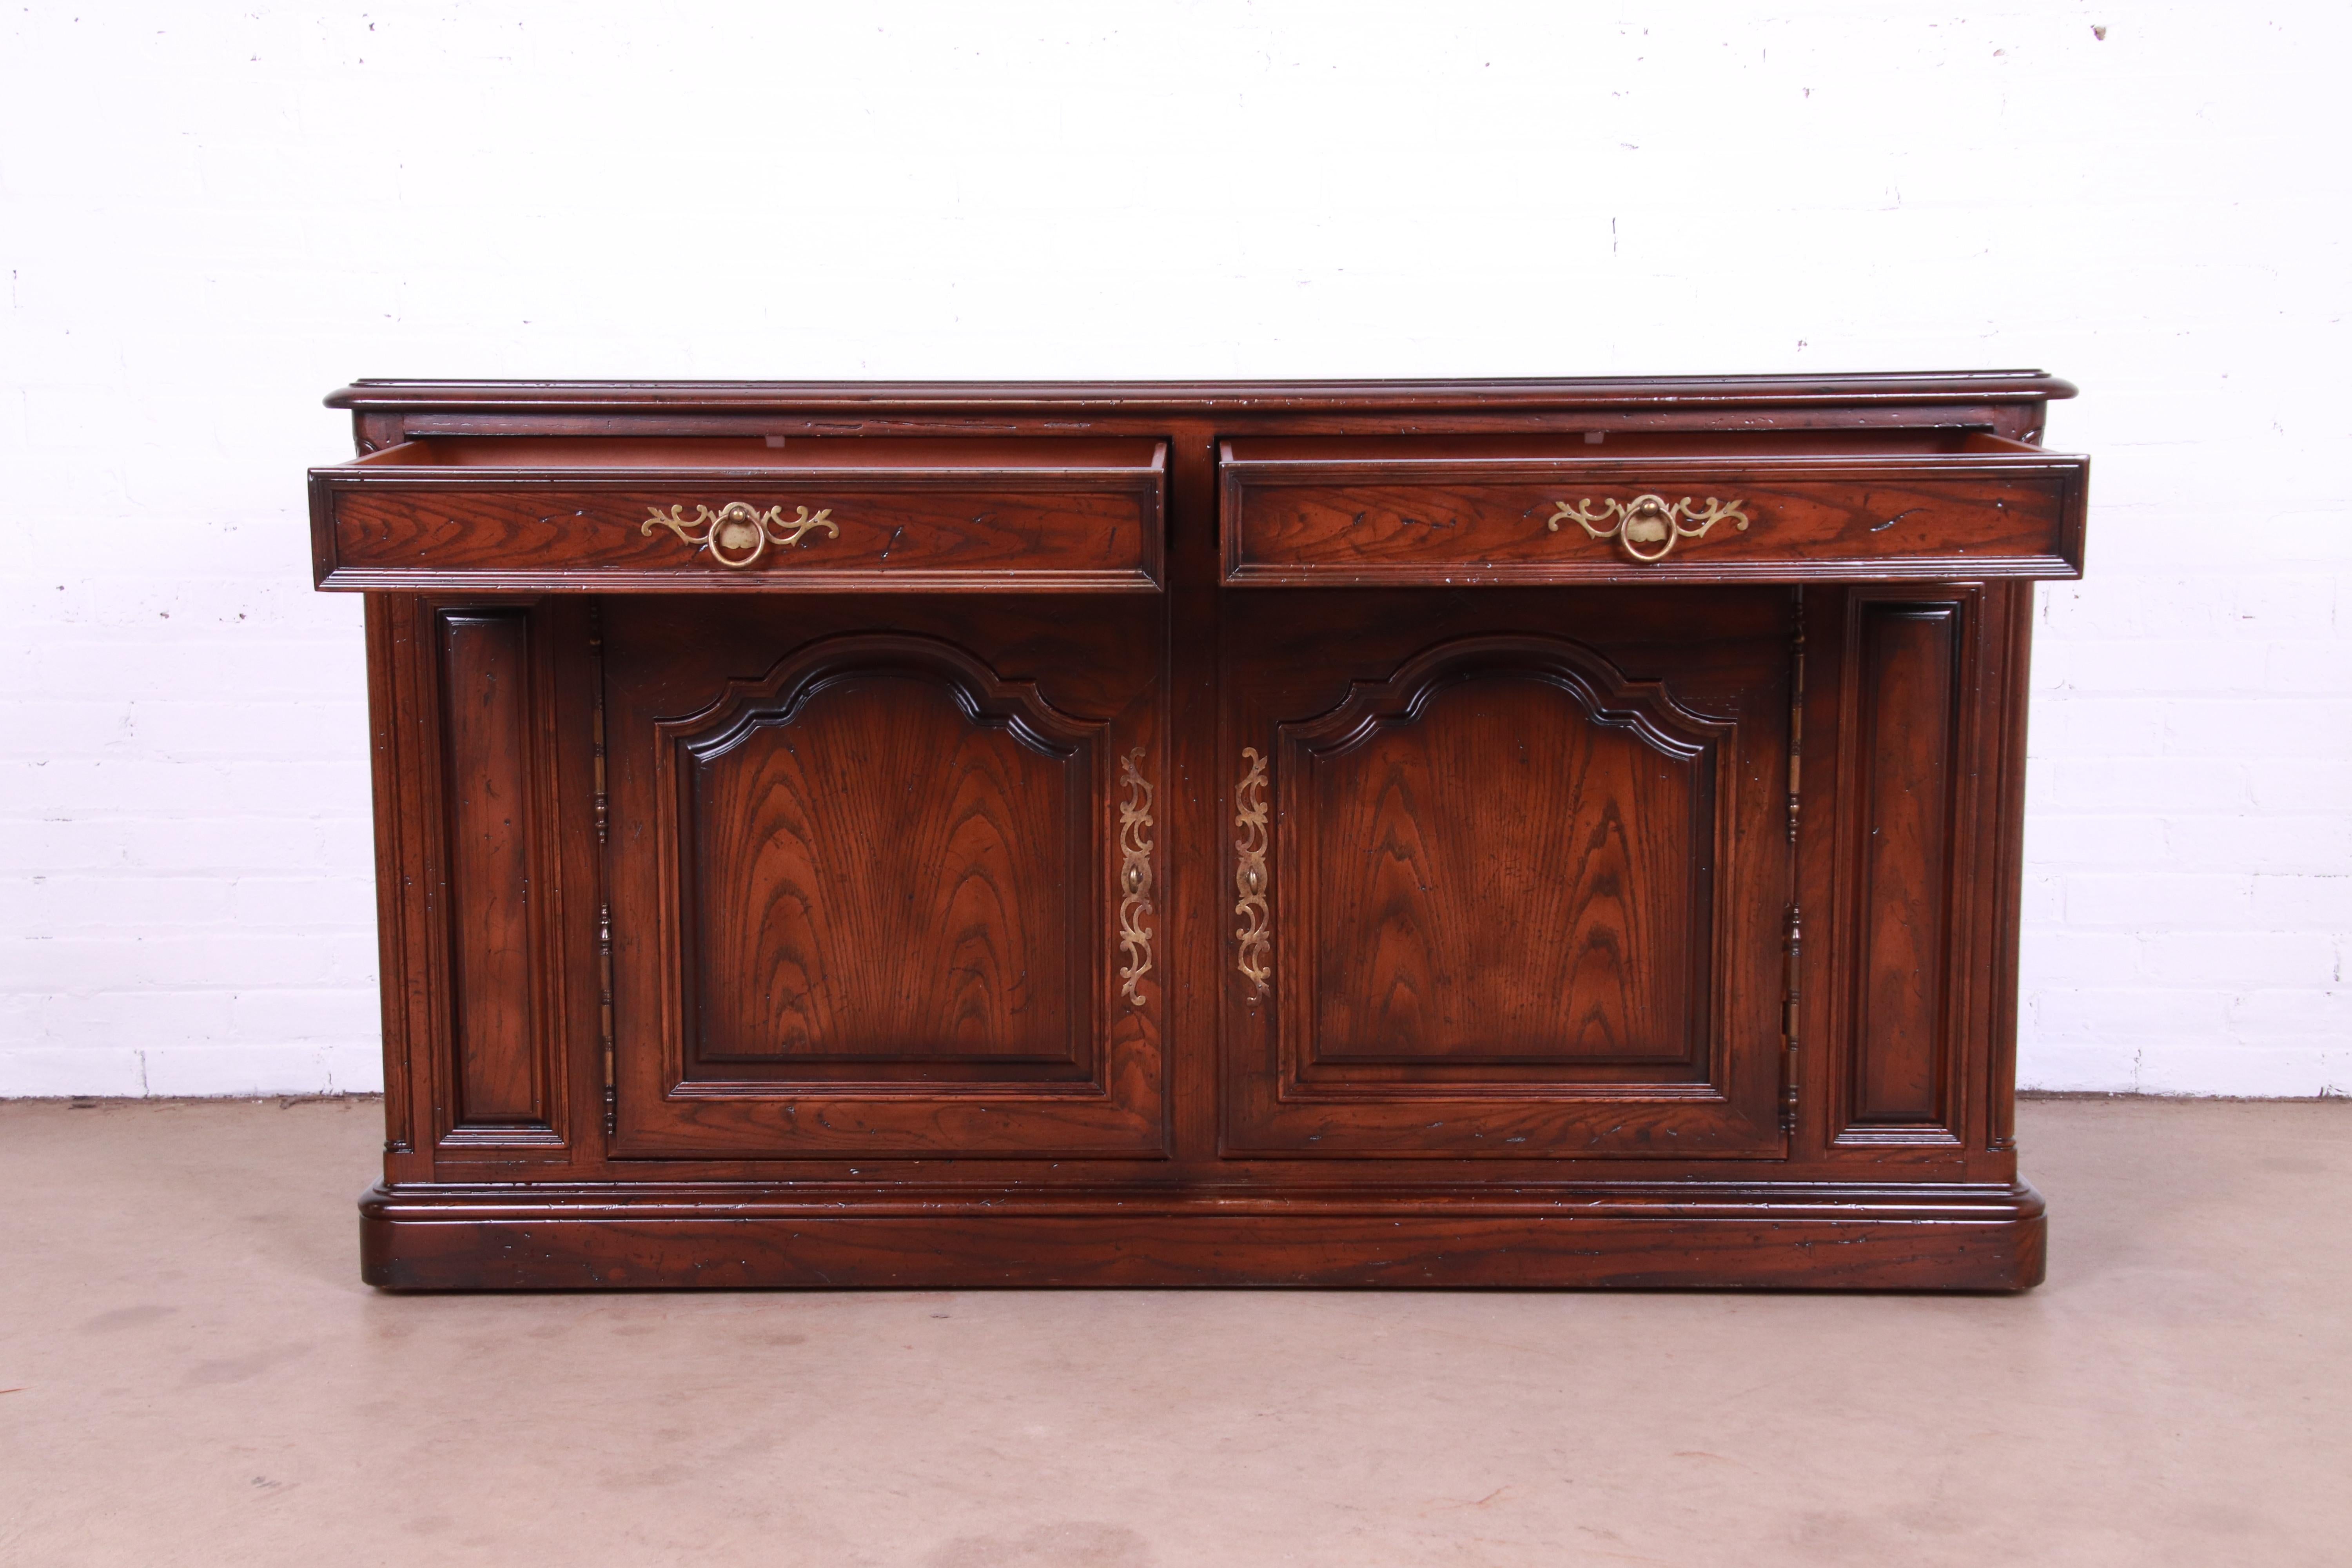 Henredon French Provincial Carved Oak Sideboard or Bar Cabinet, Circa 1970s For Sale 1